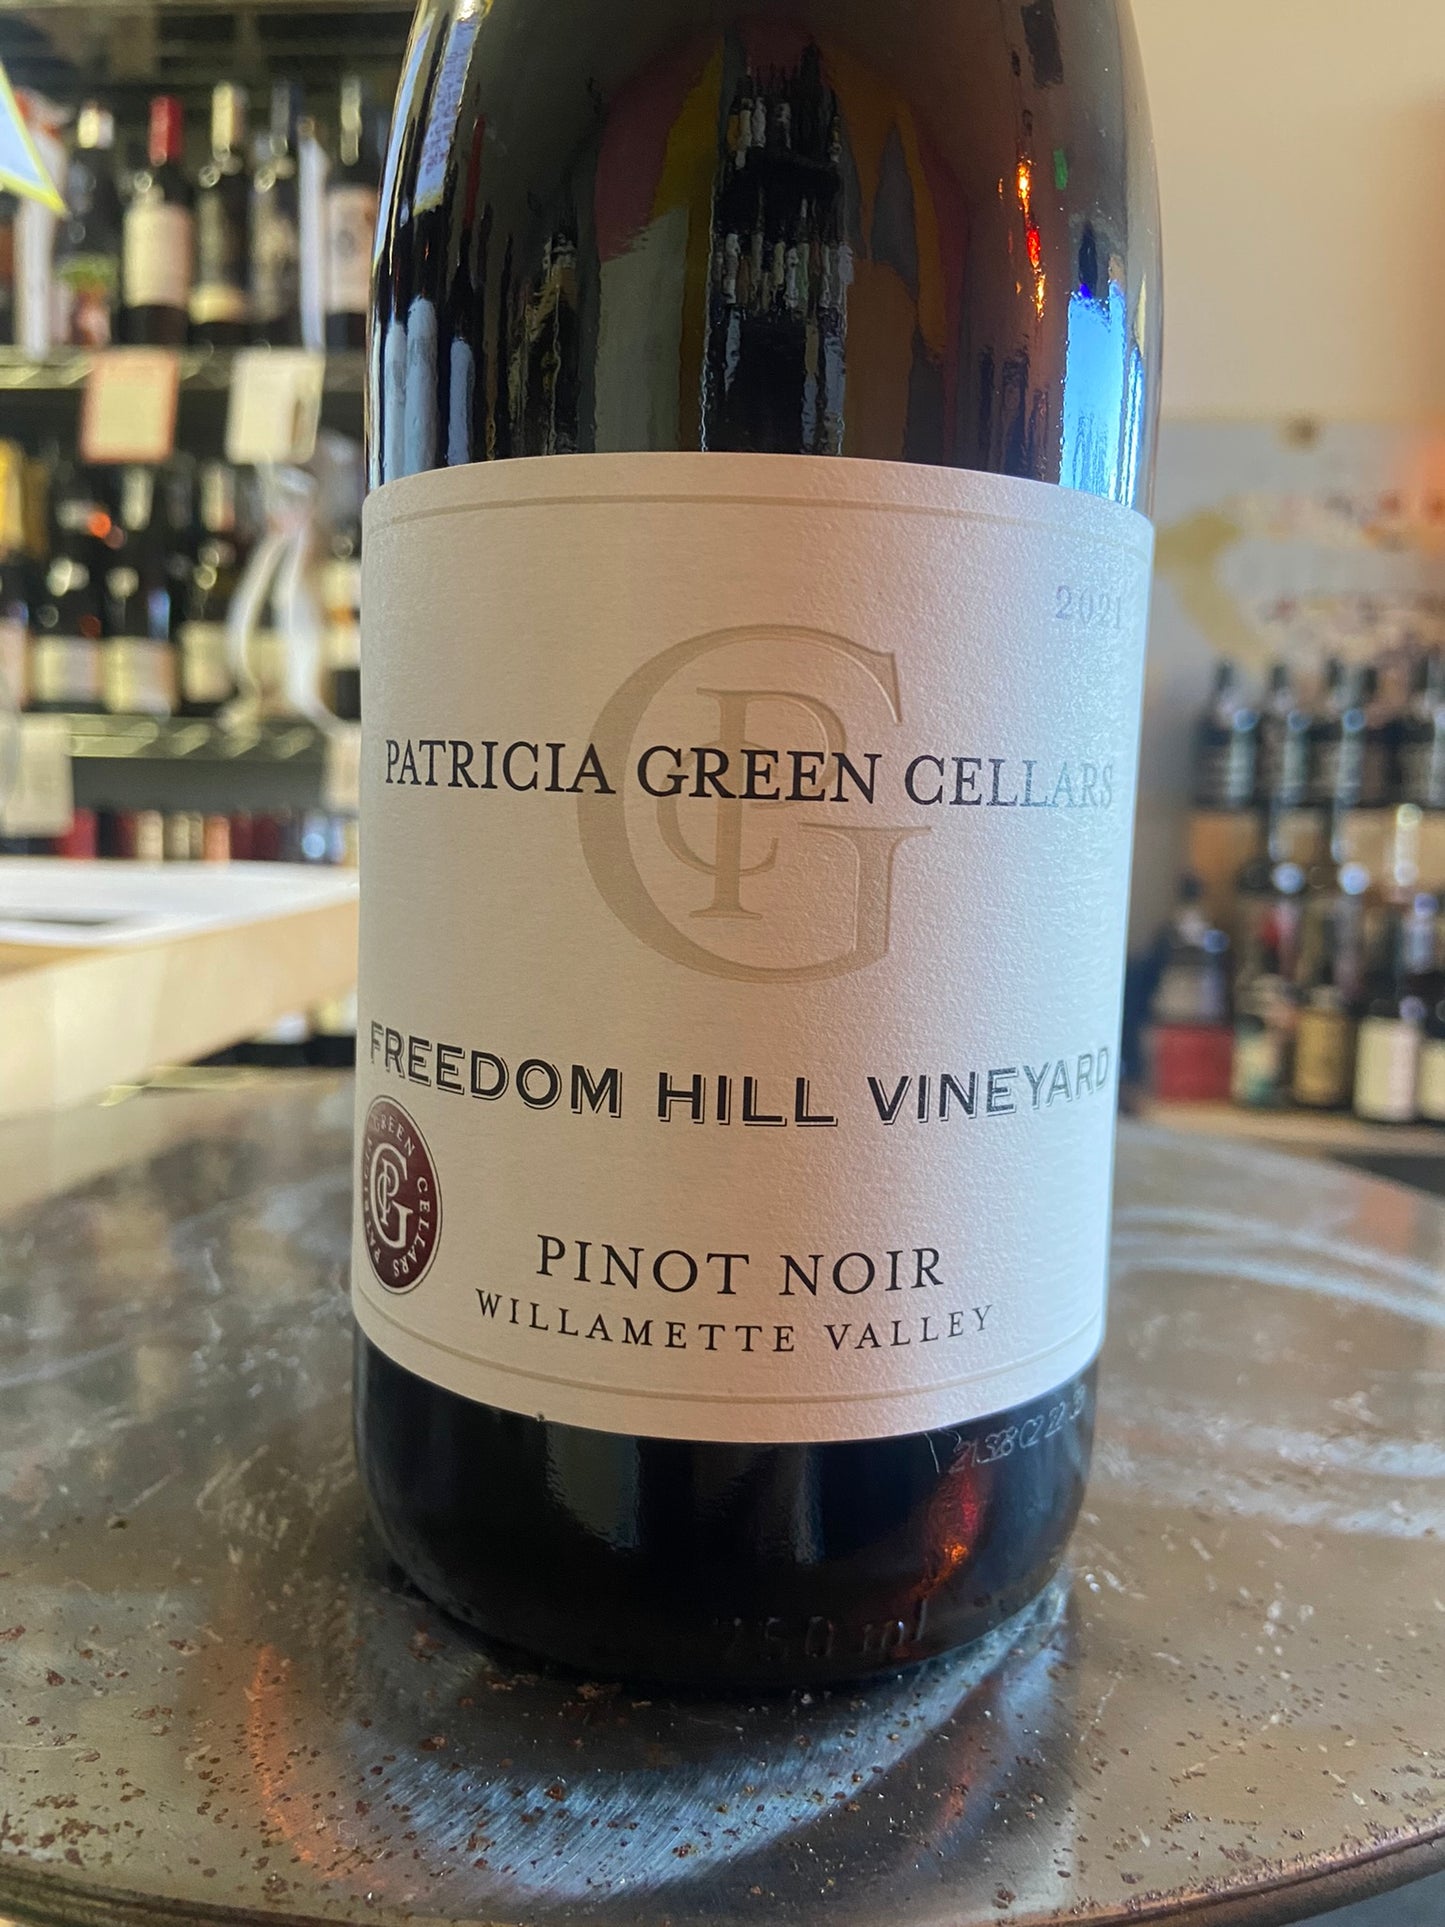 PATRICIA GREEN CELLARS 2021 Pinot Noir 'Freedom Hill Vineyard' (Willamette Valley, OR)